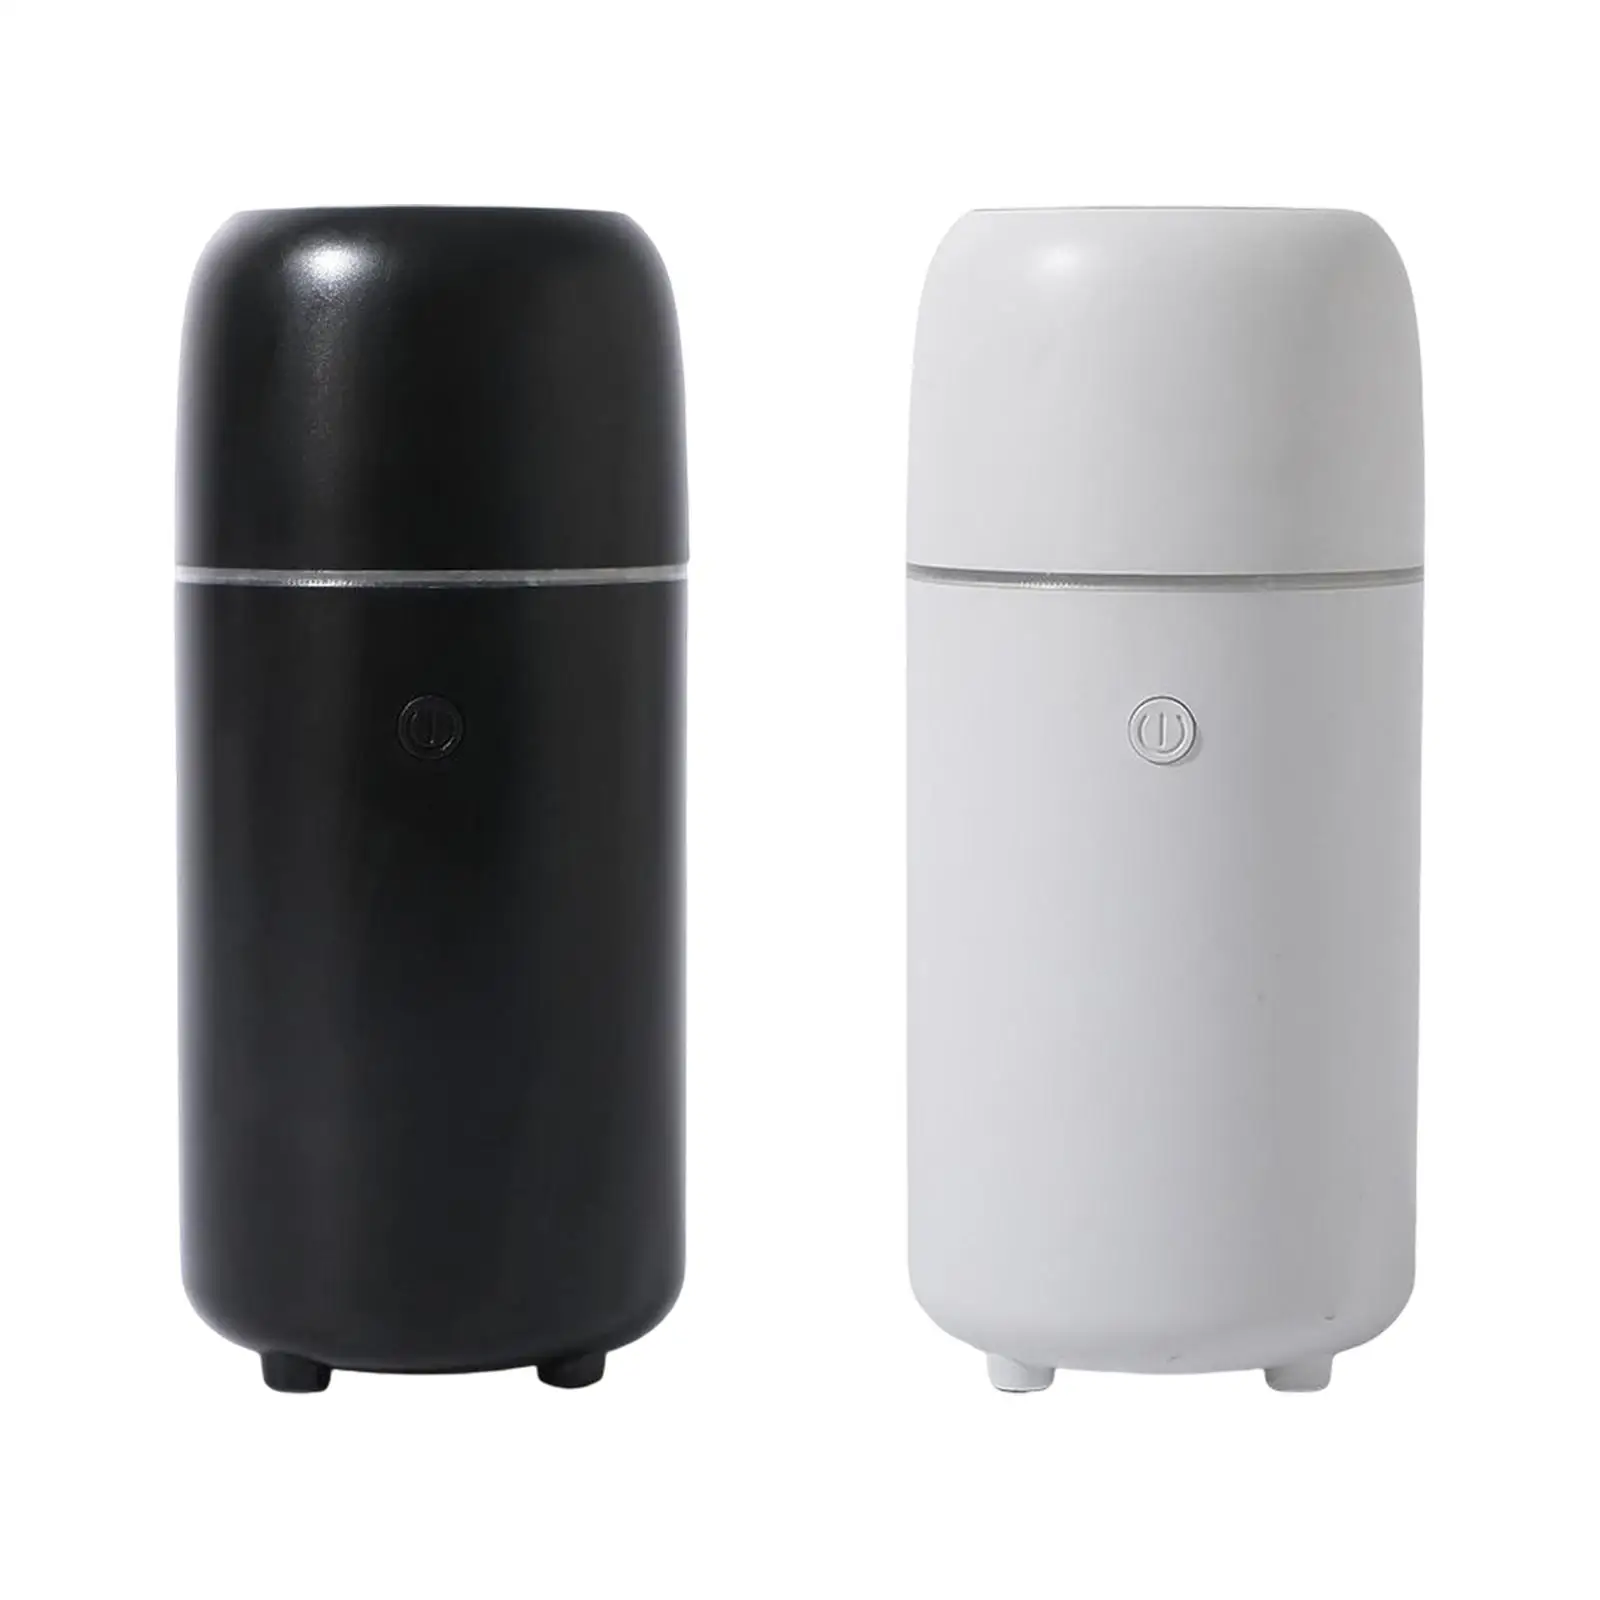 Mini Humidifier Cool Mist Auto Shut Off 100ml Low Noise Air Humidifier Desktop Humidifier for Home Nursery Office Car Travel